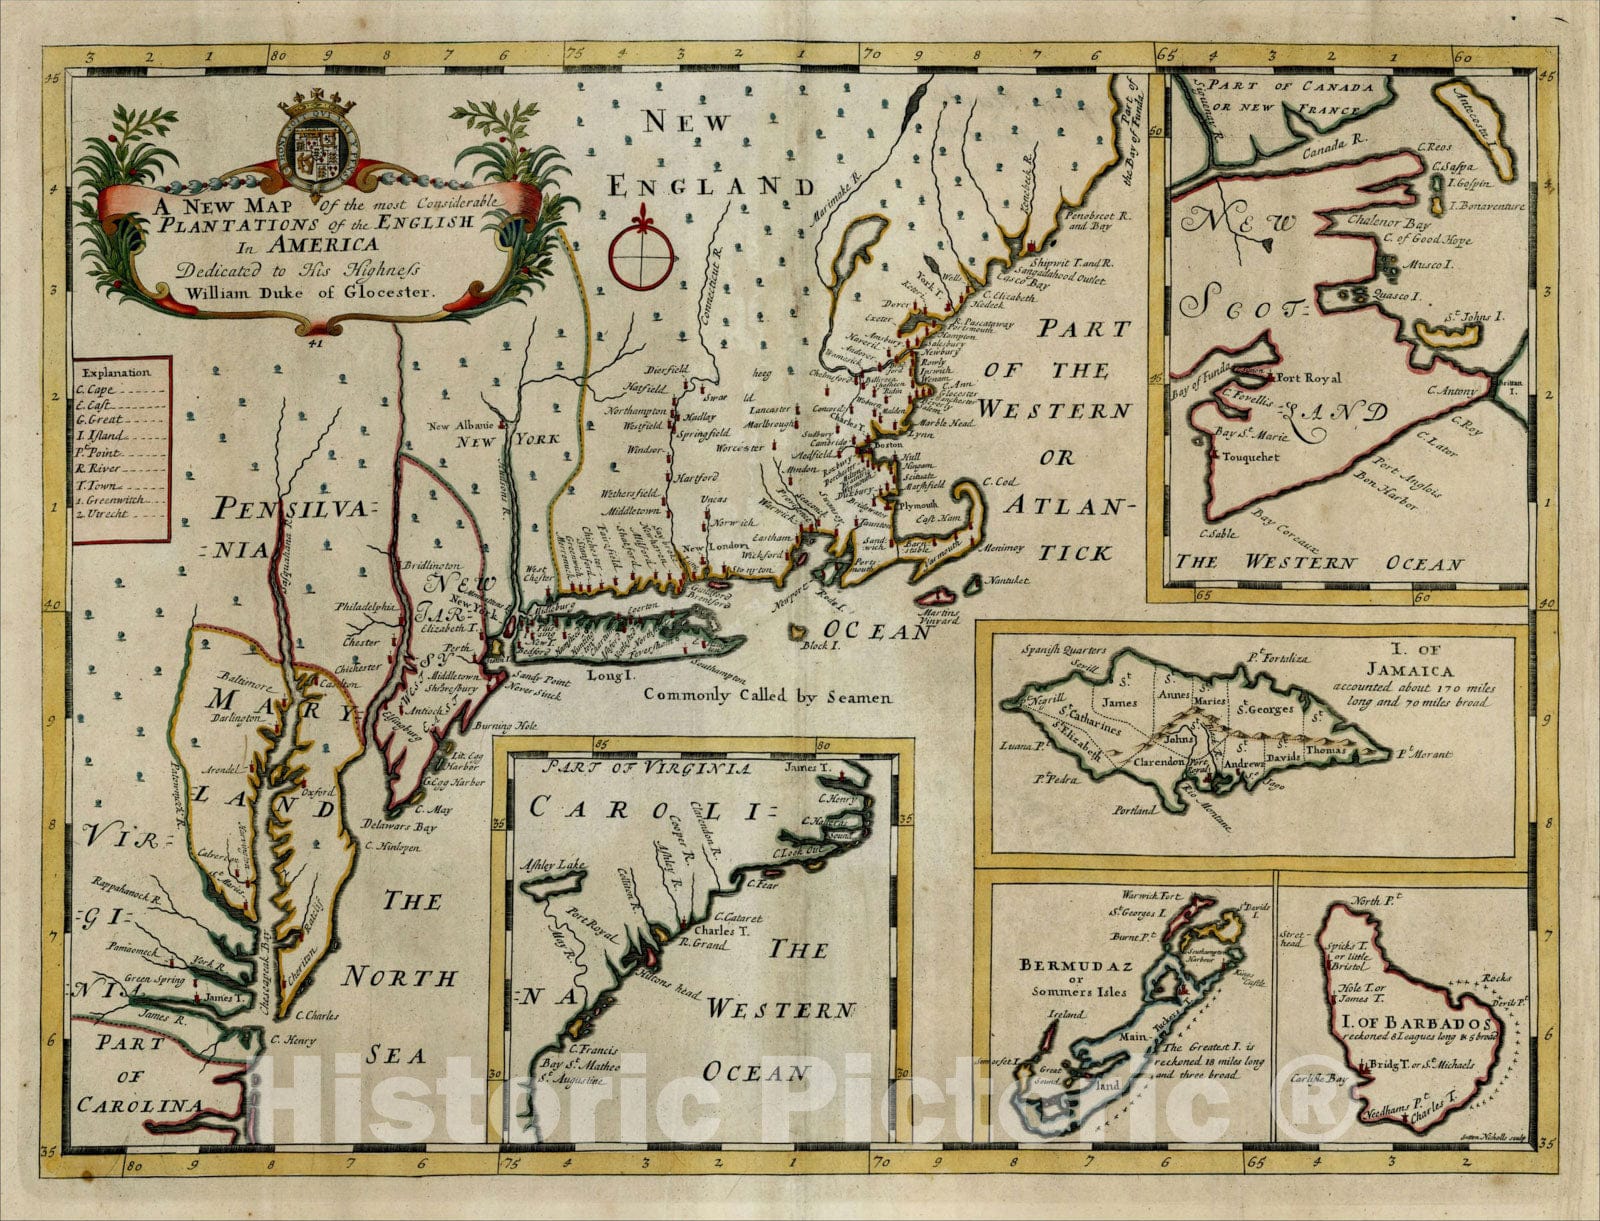 Historic Map : A New Map of the most Considerable Plantations of the English In America Dedcicated to His Highness William Duke of Glocester, 1700, Vintage Wall Art